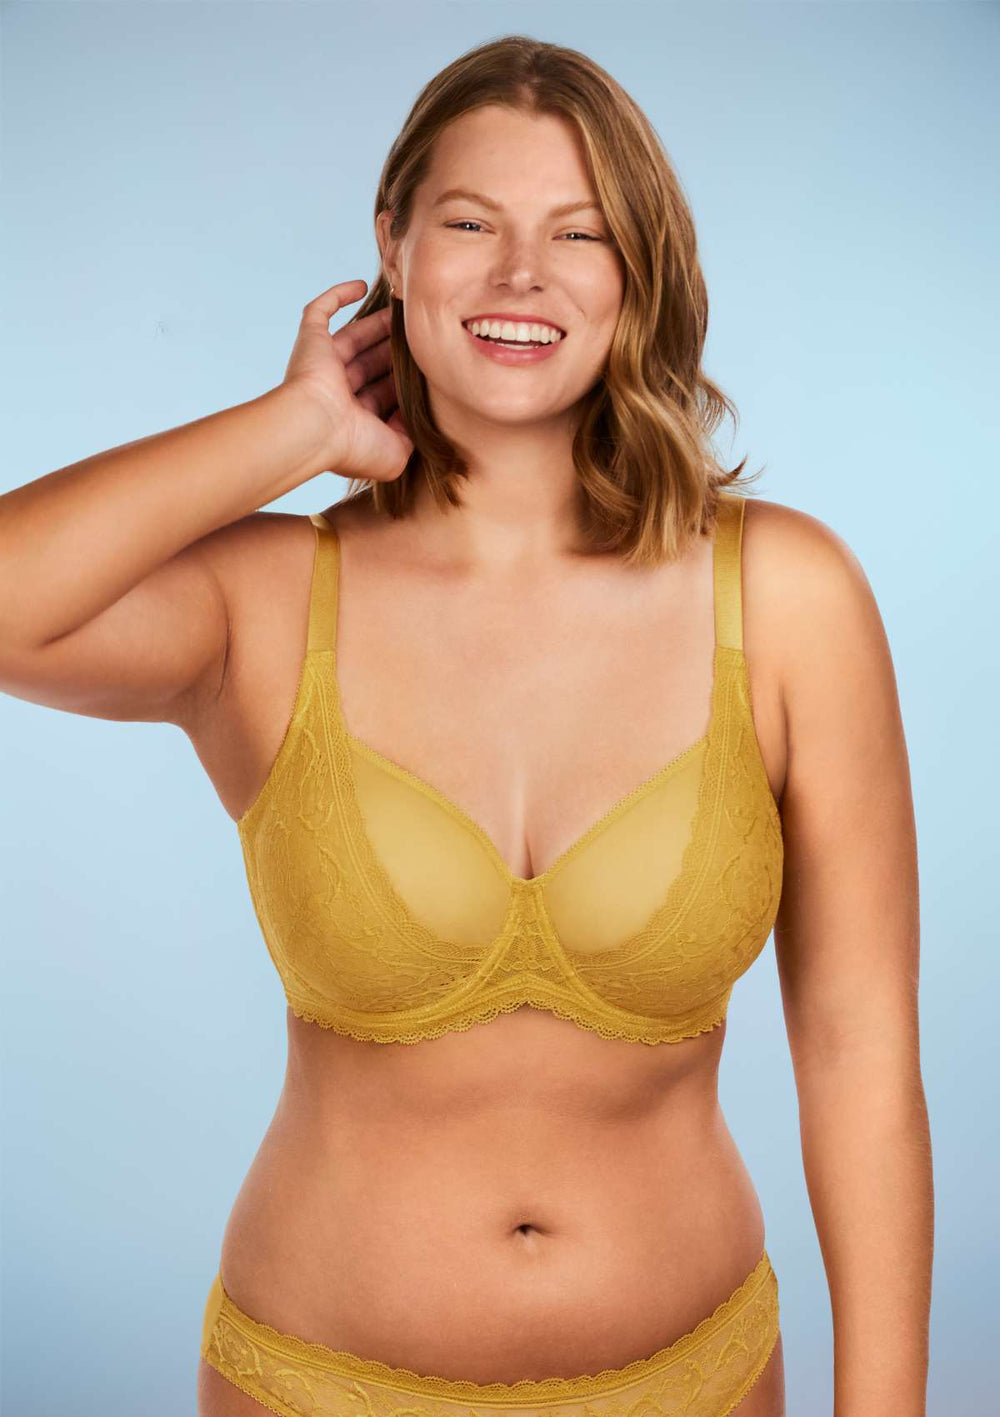 Are unlined bras good? - Quora